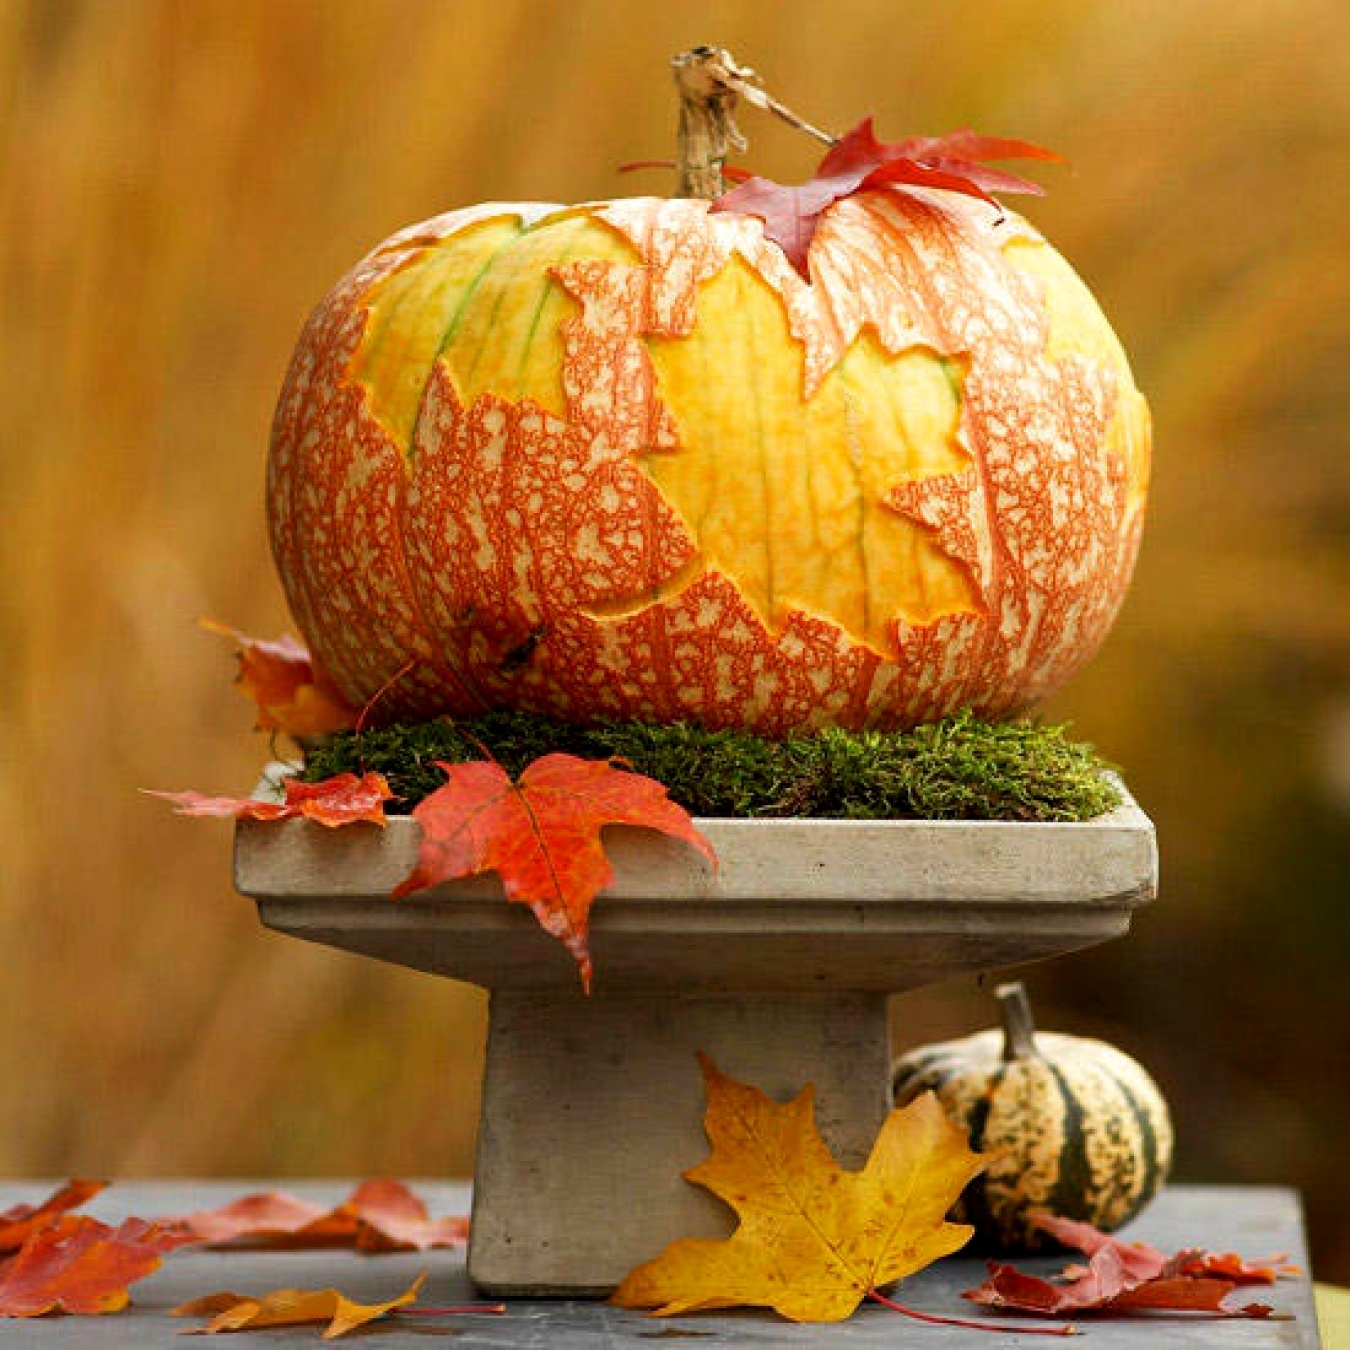 decorating-with-pumpkins-and-gourds-ideas-7